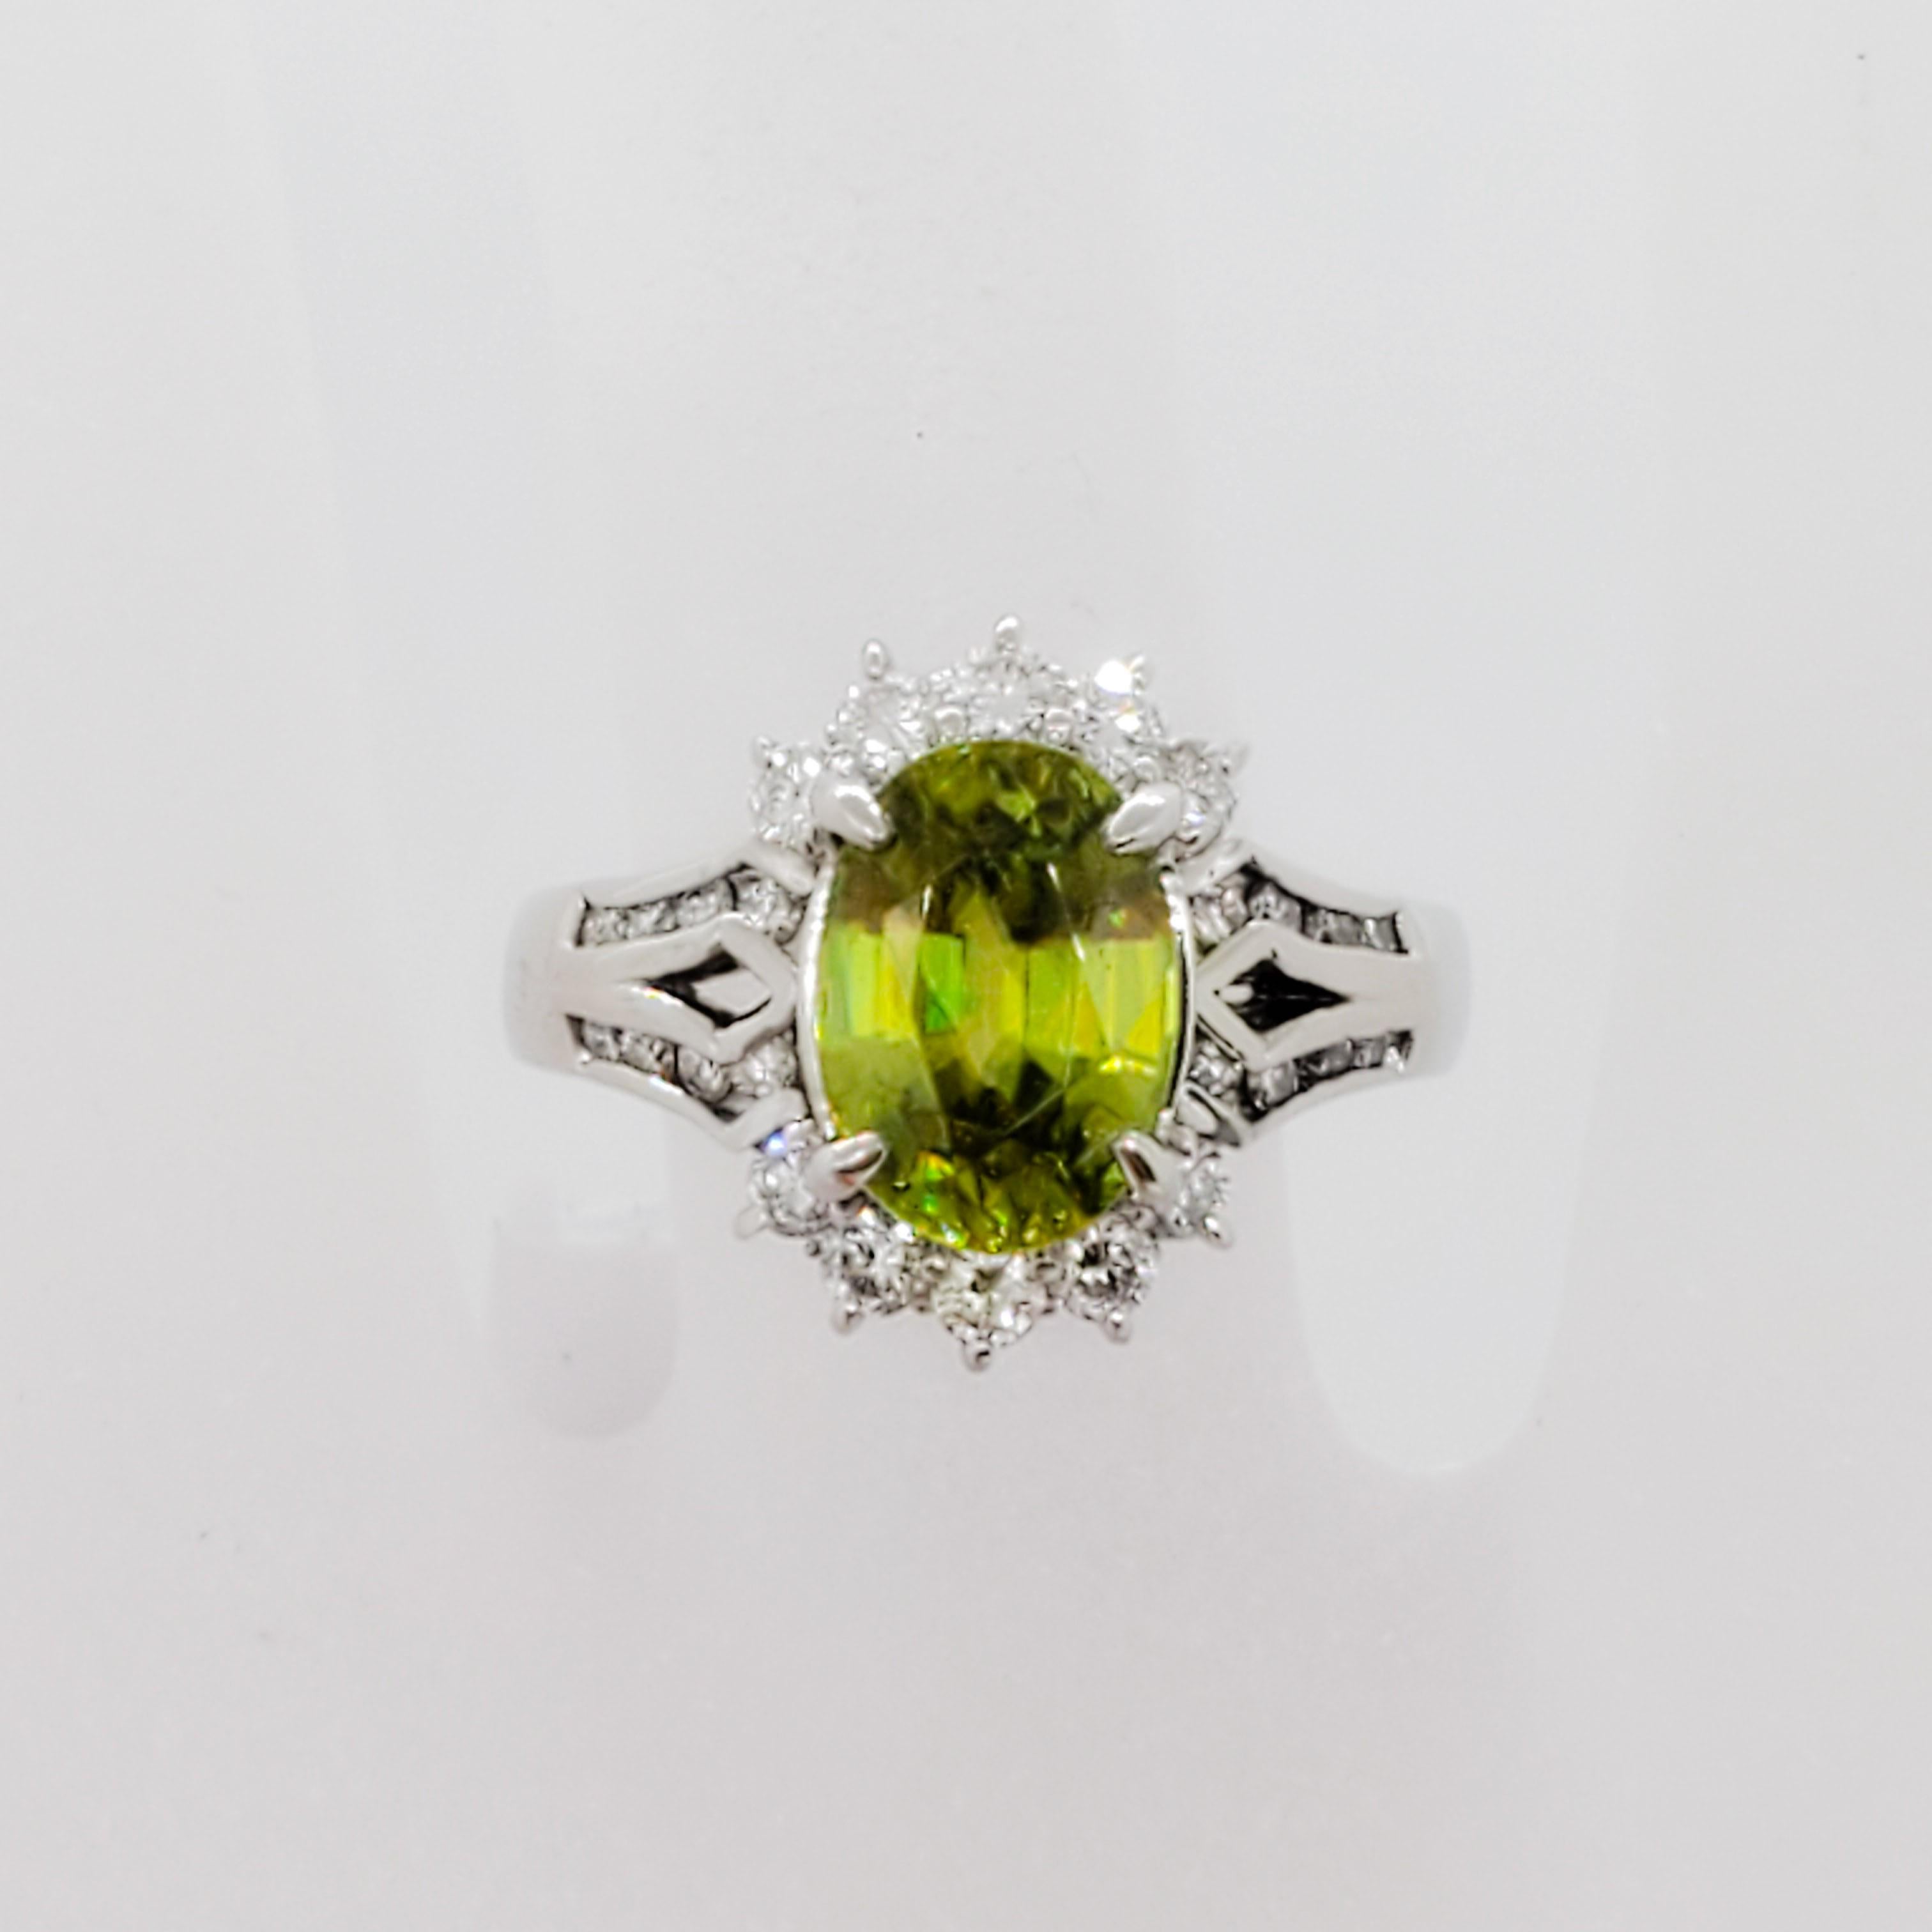 Oval Cut Estate Green Sphene Oval and White Diamond Cocktail Ring in Platinum